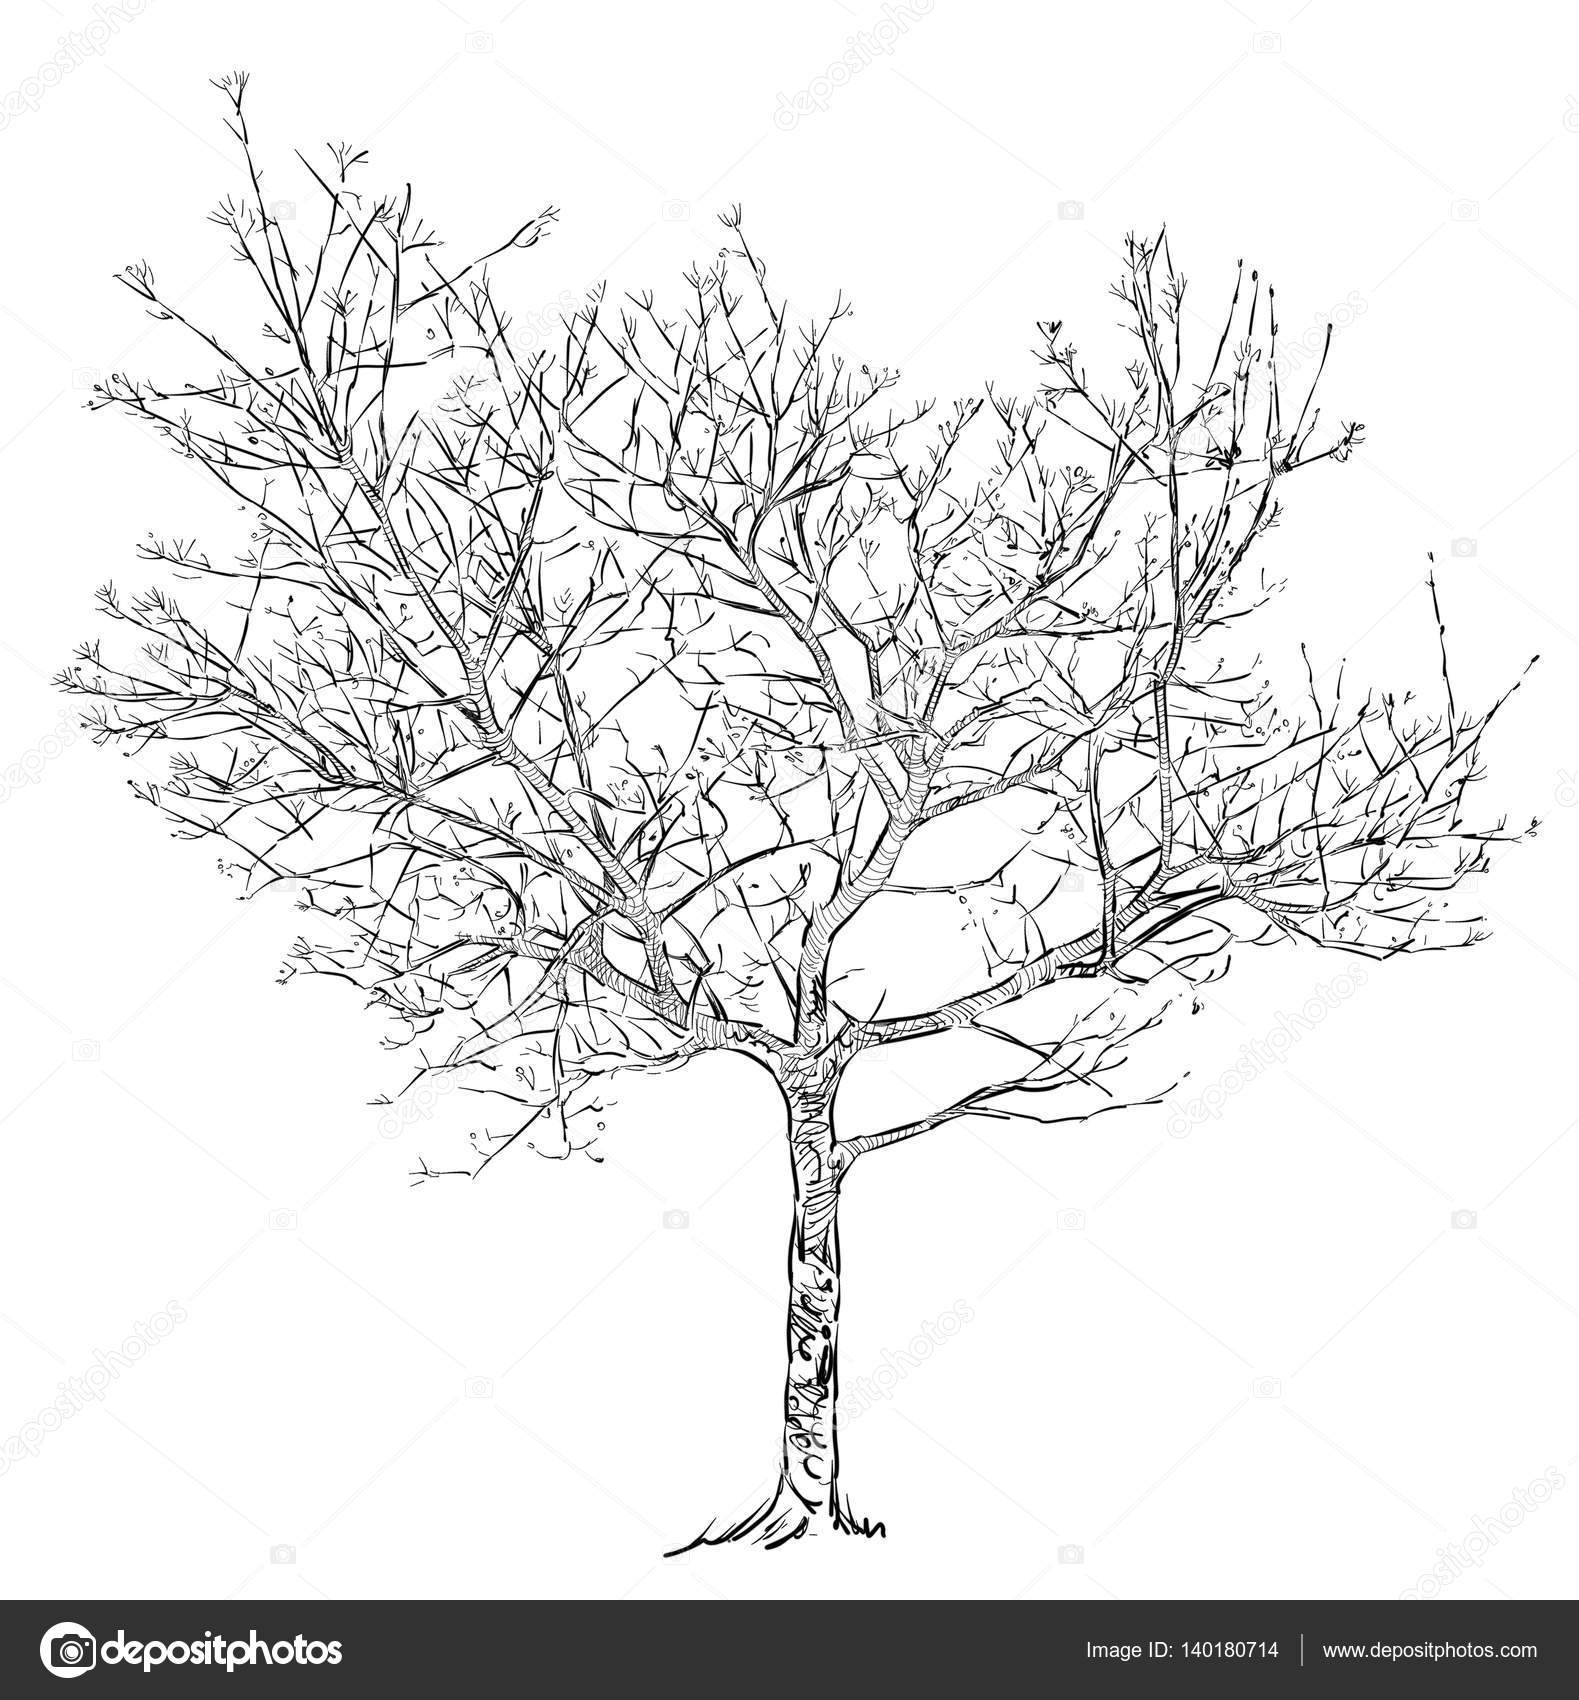 Fruit tree sketch icon Fruit tree vector sketch icon isolated on  background hand drawn fruit tree icon fruit tree sketch  CanStock